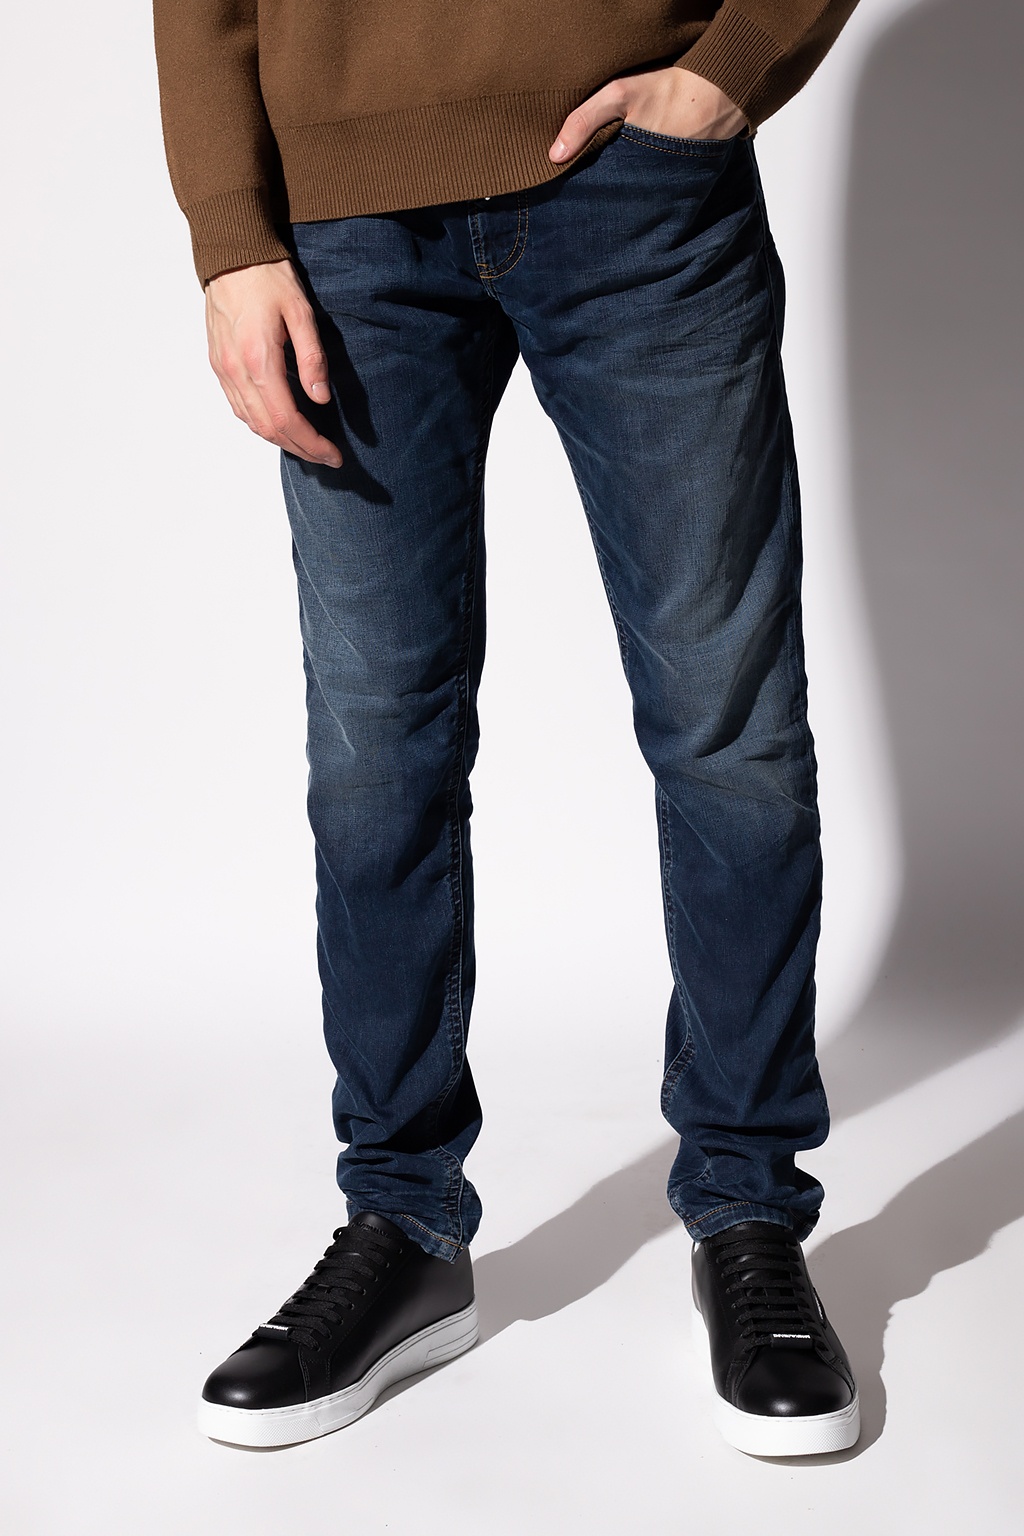 DIESEL THOMMER JOGG JEANS - パンツ